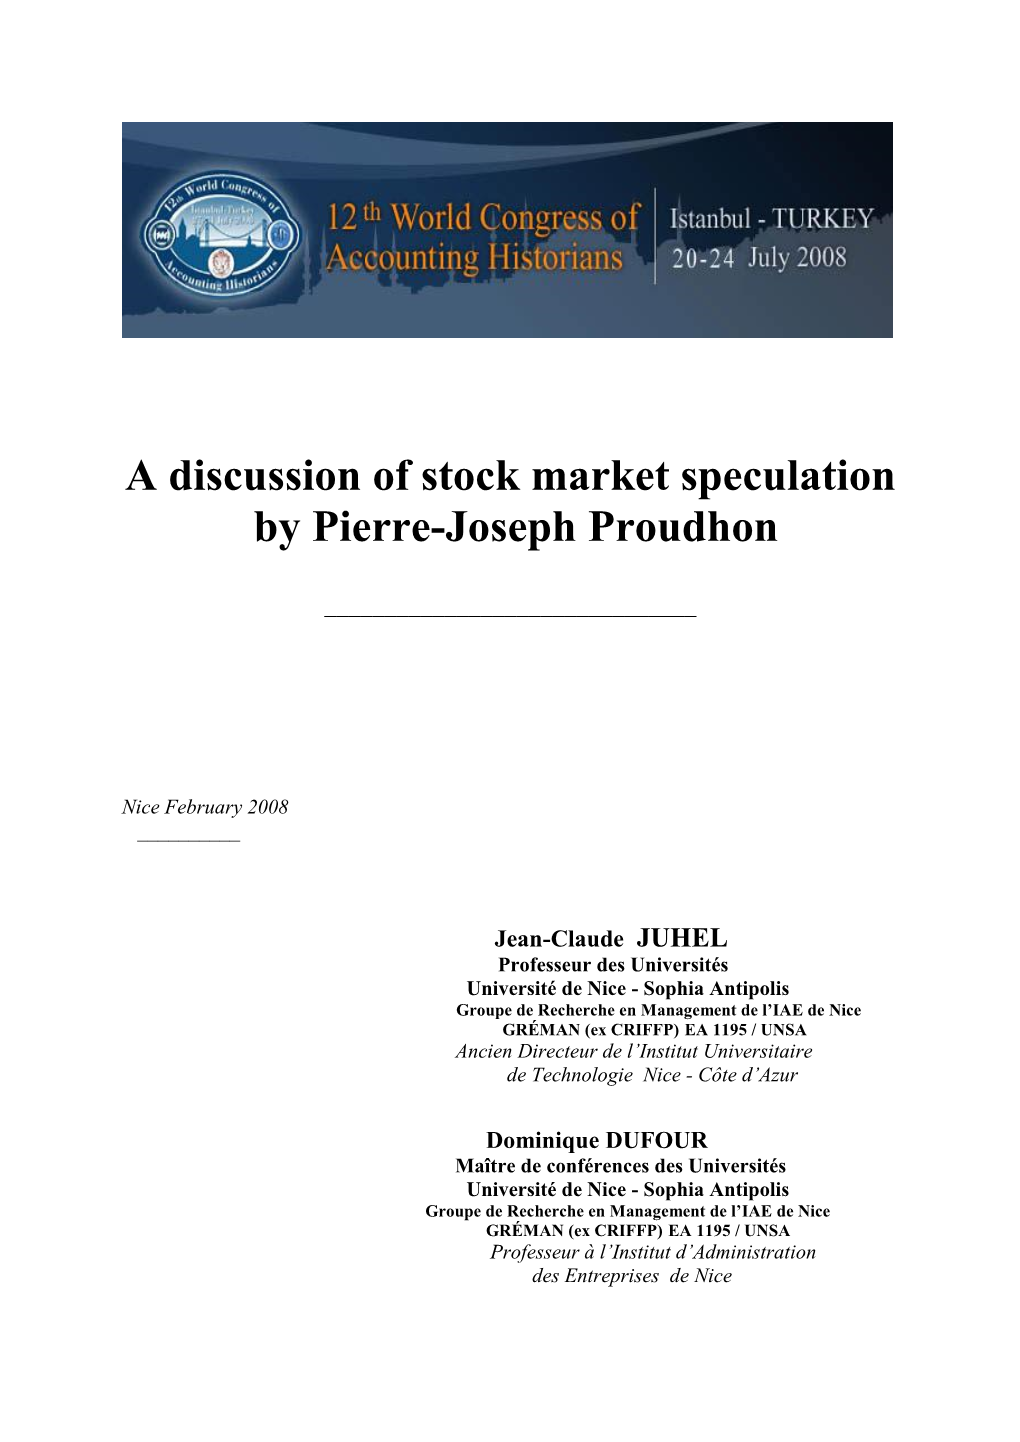 A Discussion of Stock Market Speculation by Pierre-Joseph Proudhon